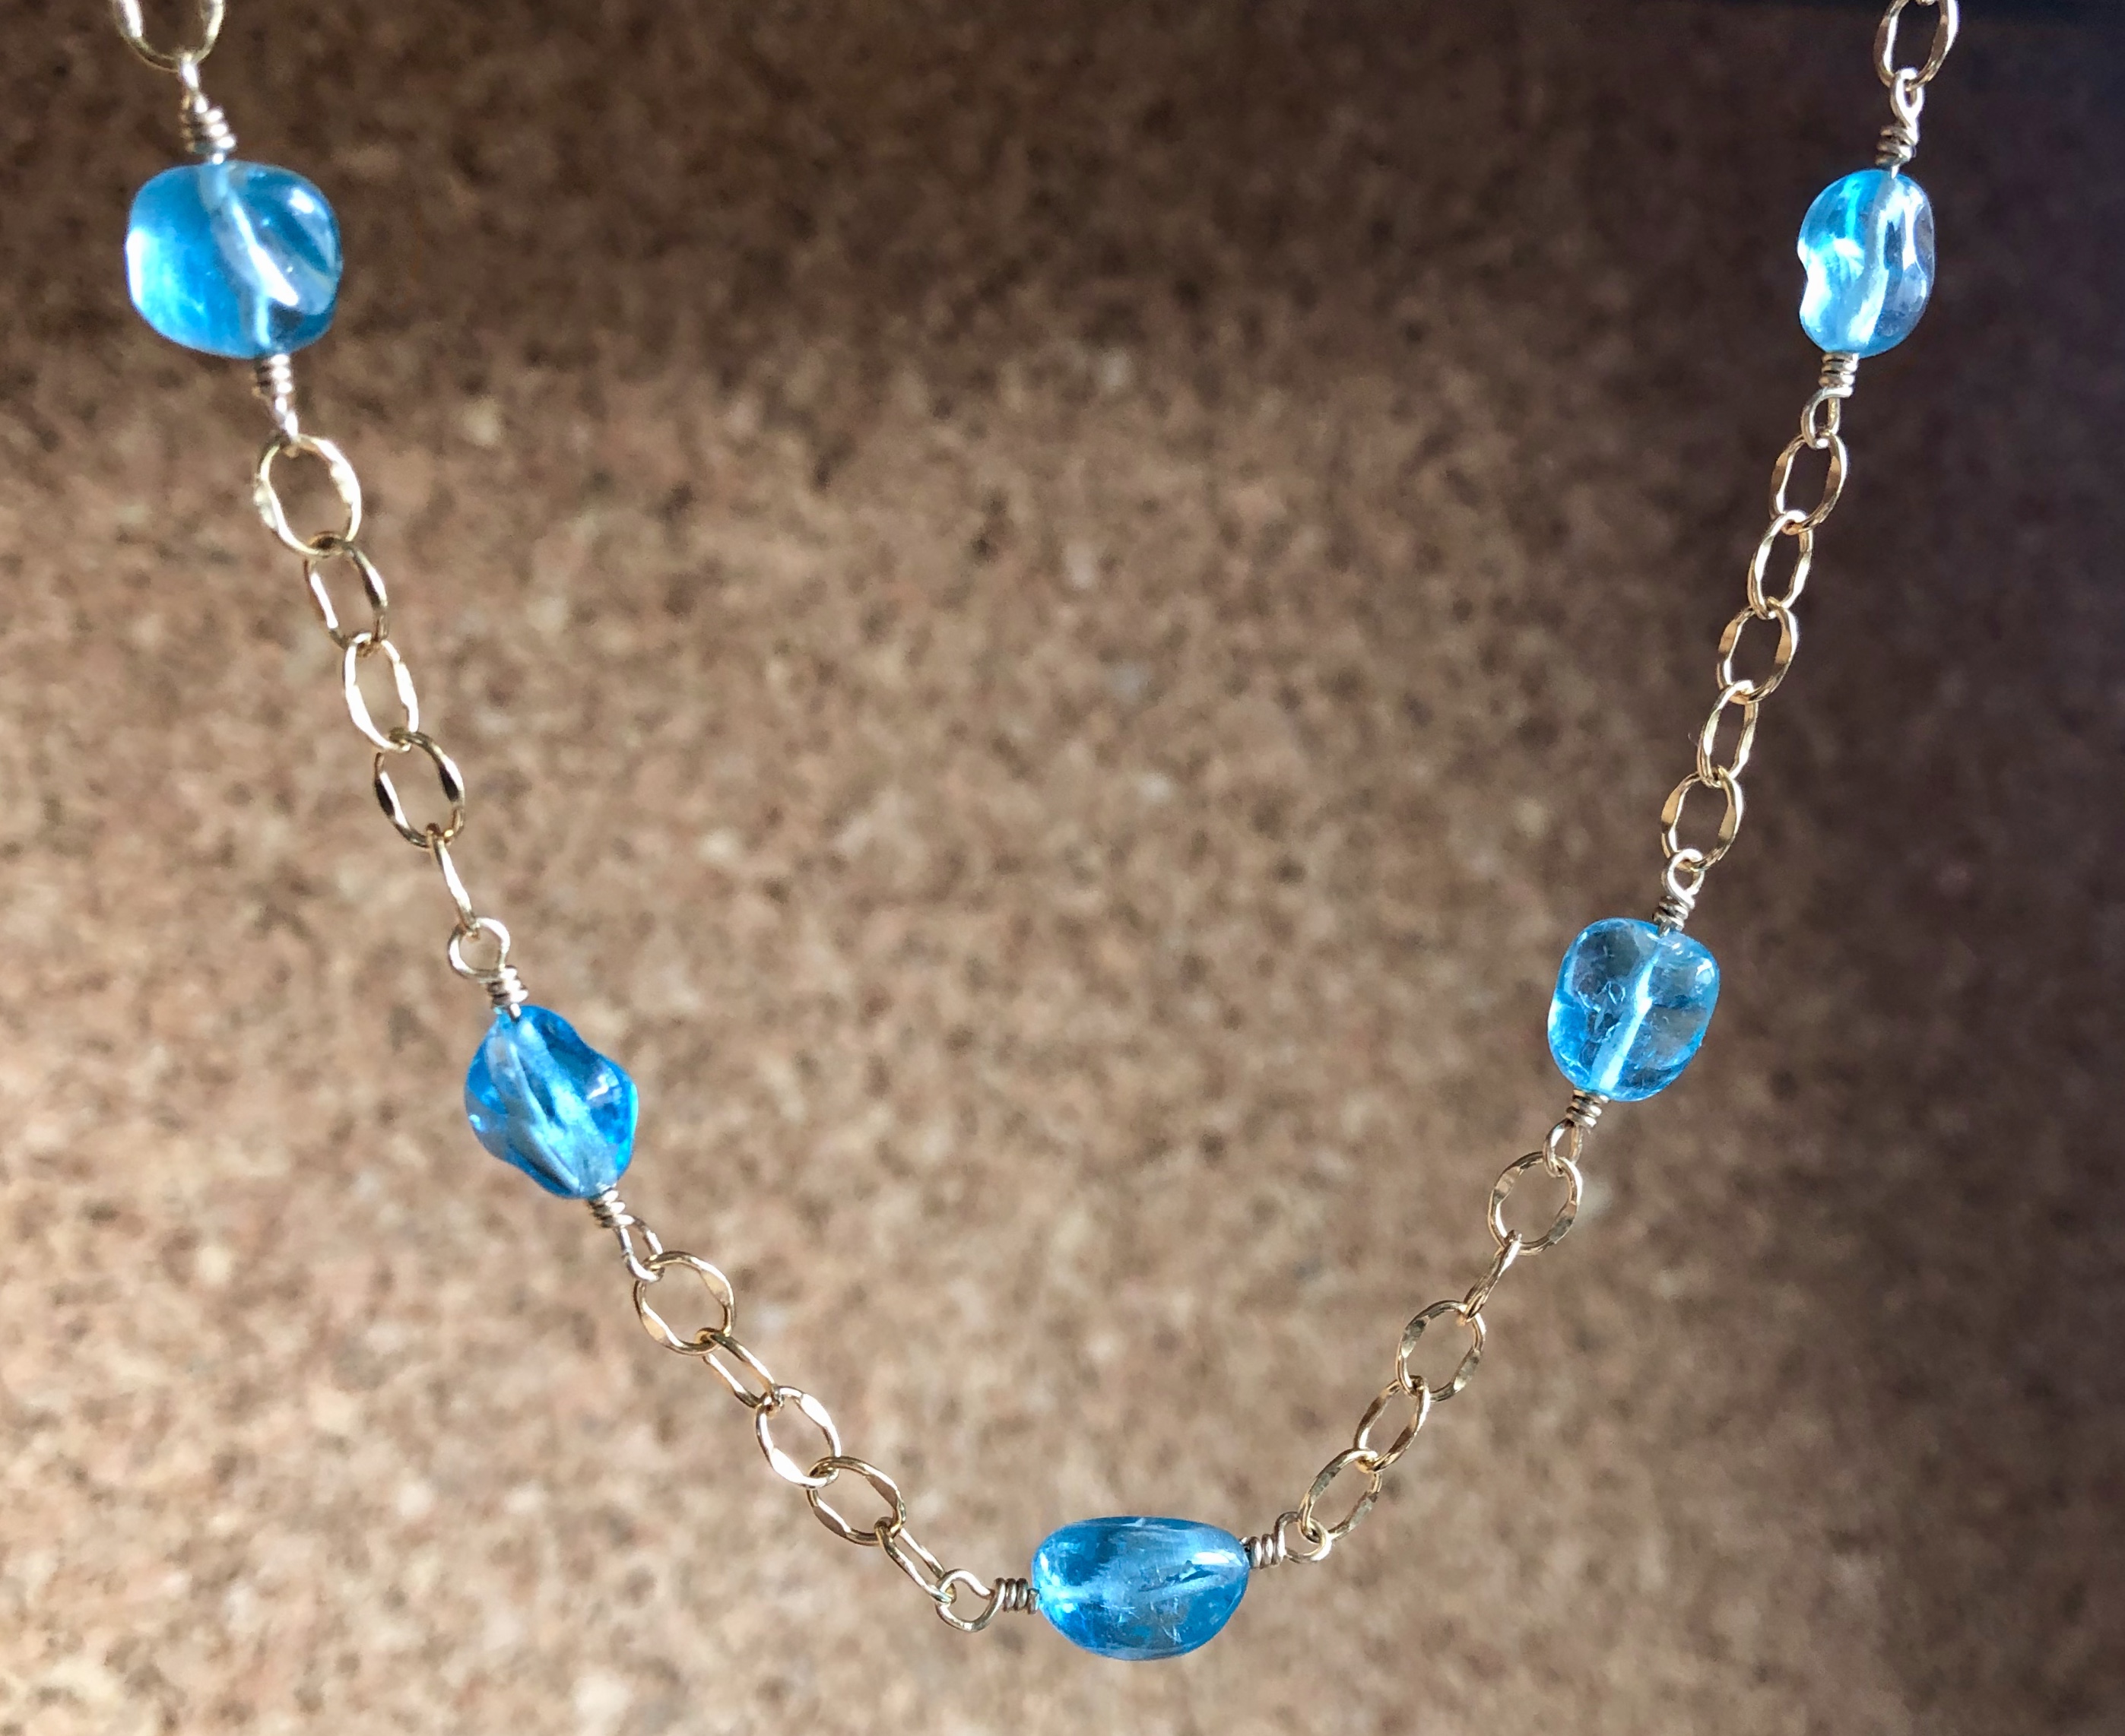 NEON APATITE NECKLACE - Facets of Ritual